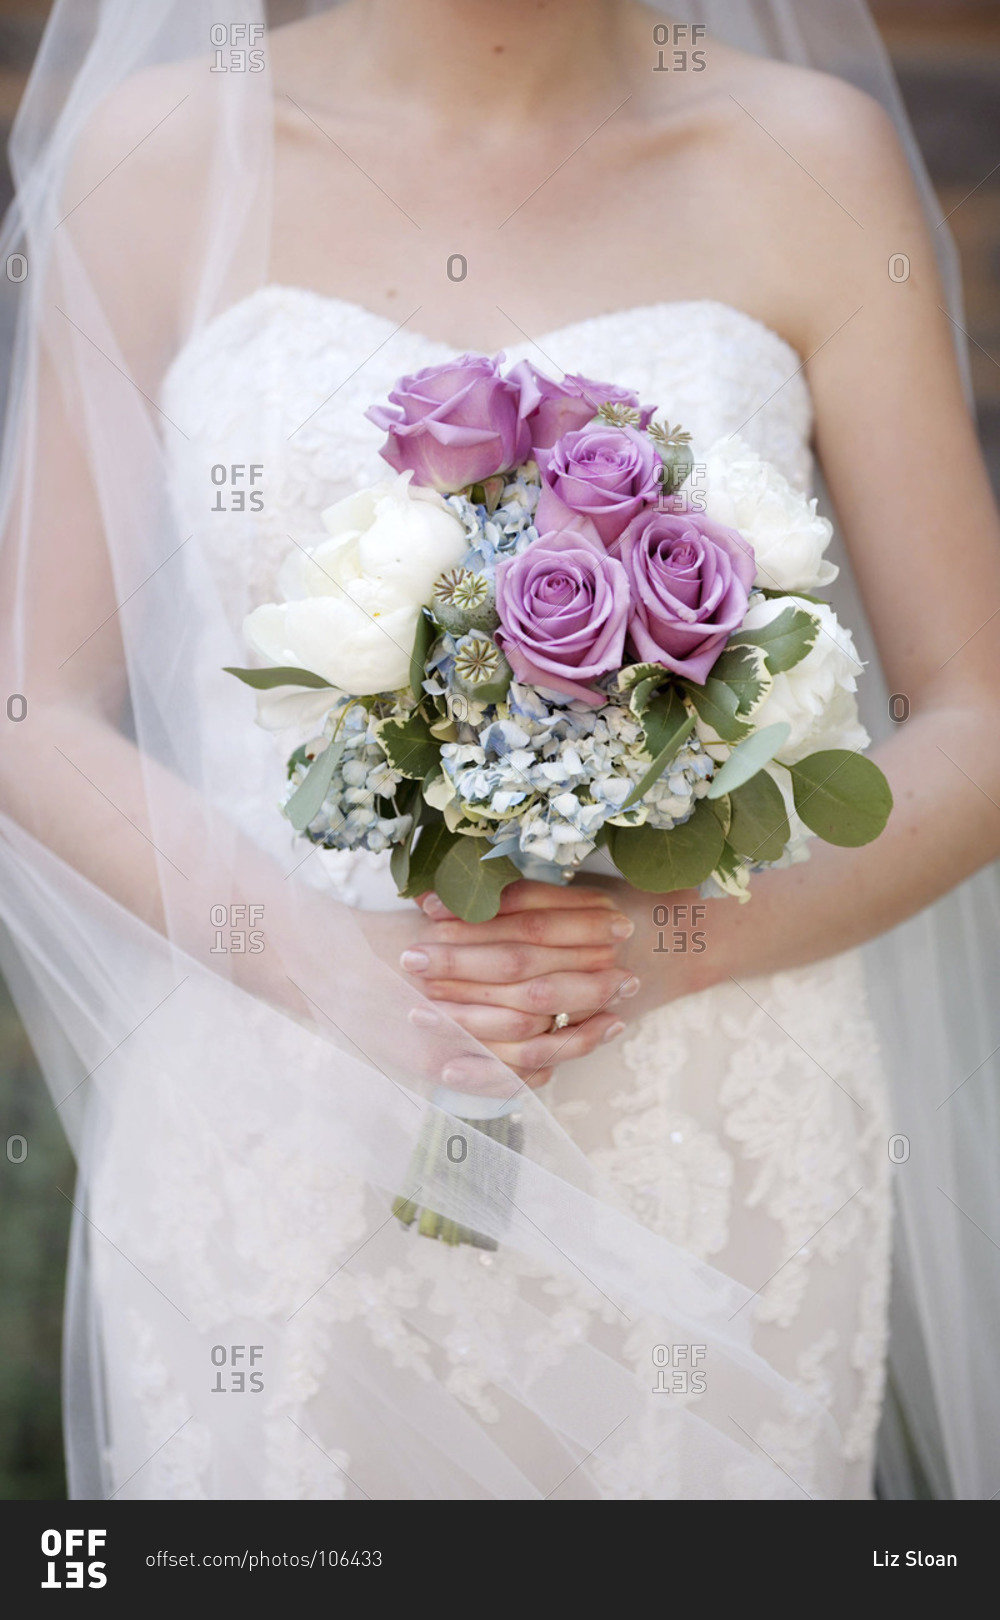 Mid section view of bride holding bridal bouquet